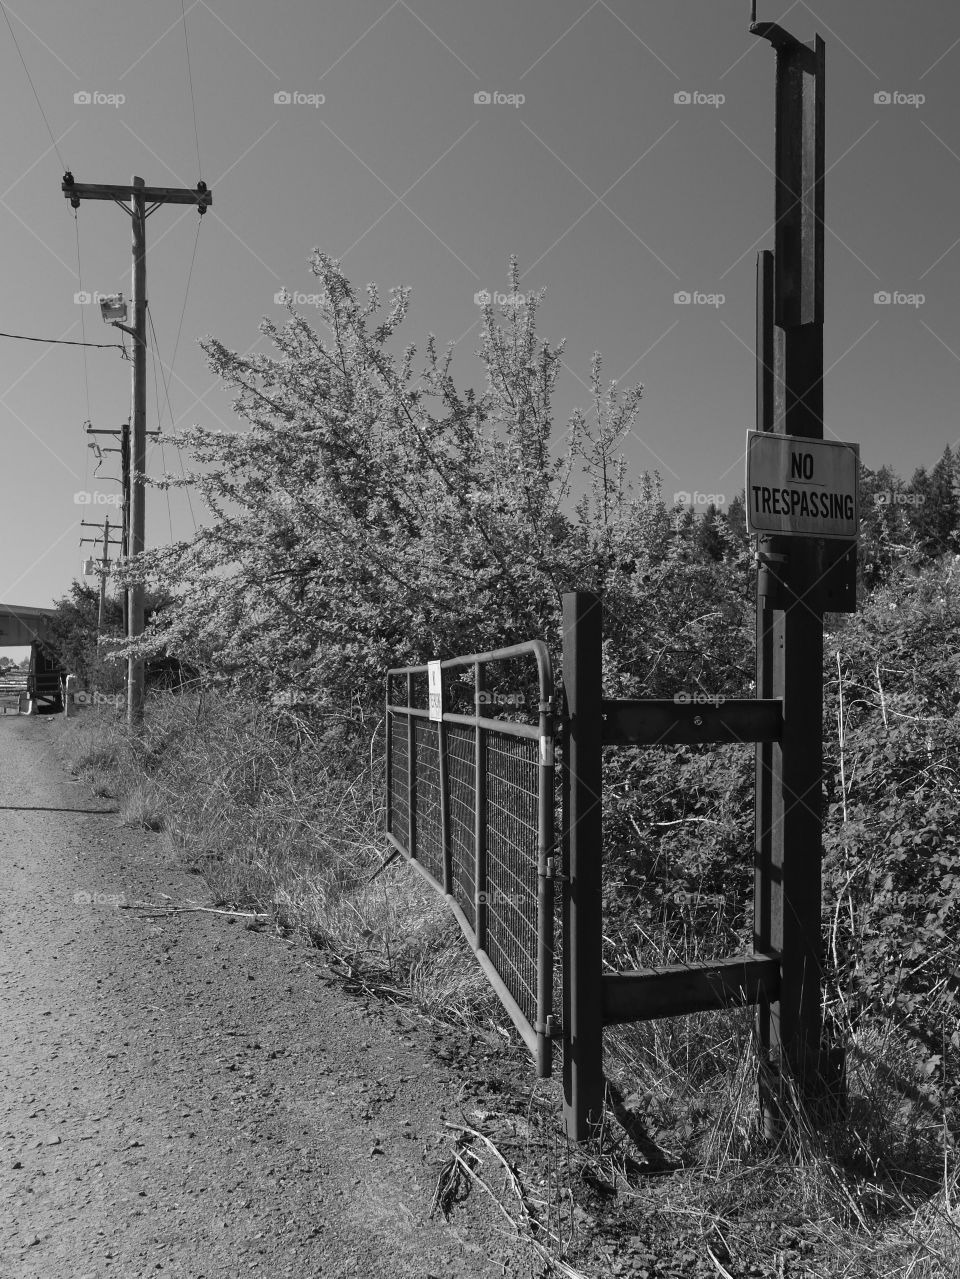 A “No Trespassing” hangs from a pole next to a metal gate amongst trees by a dirt road in Western Oregon. 